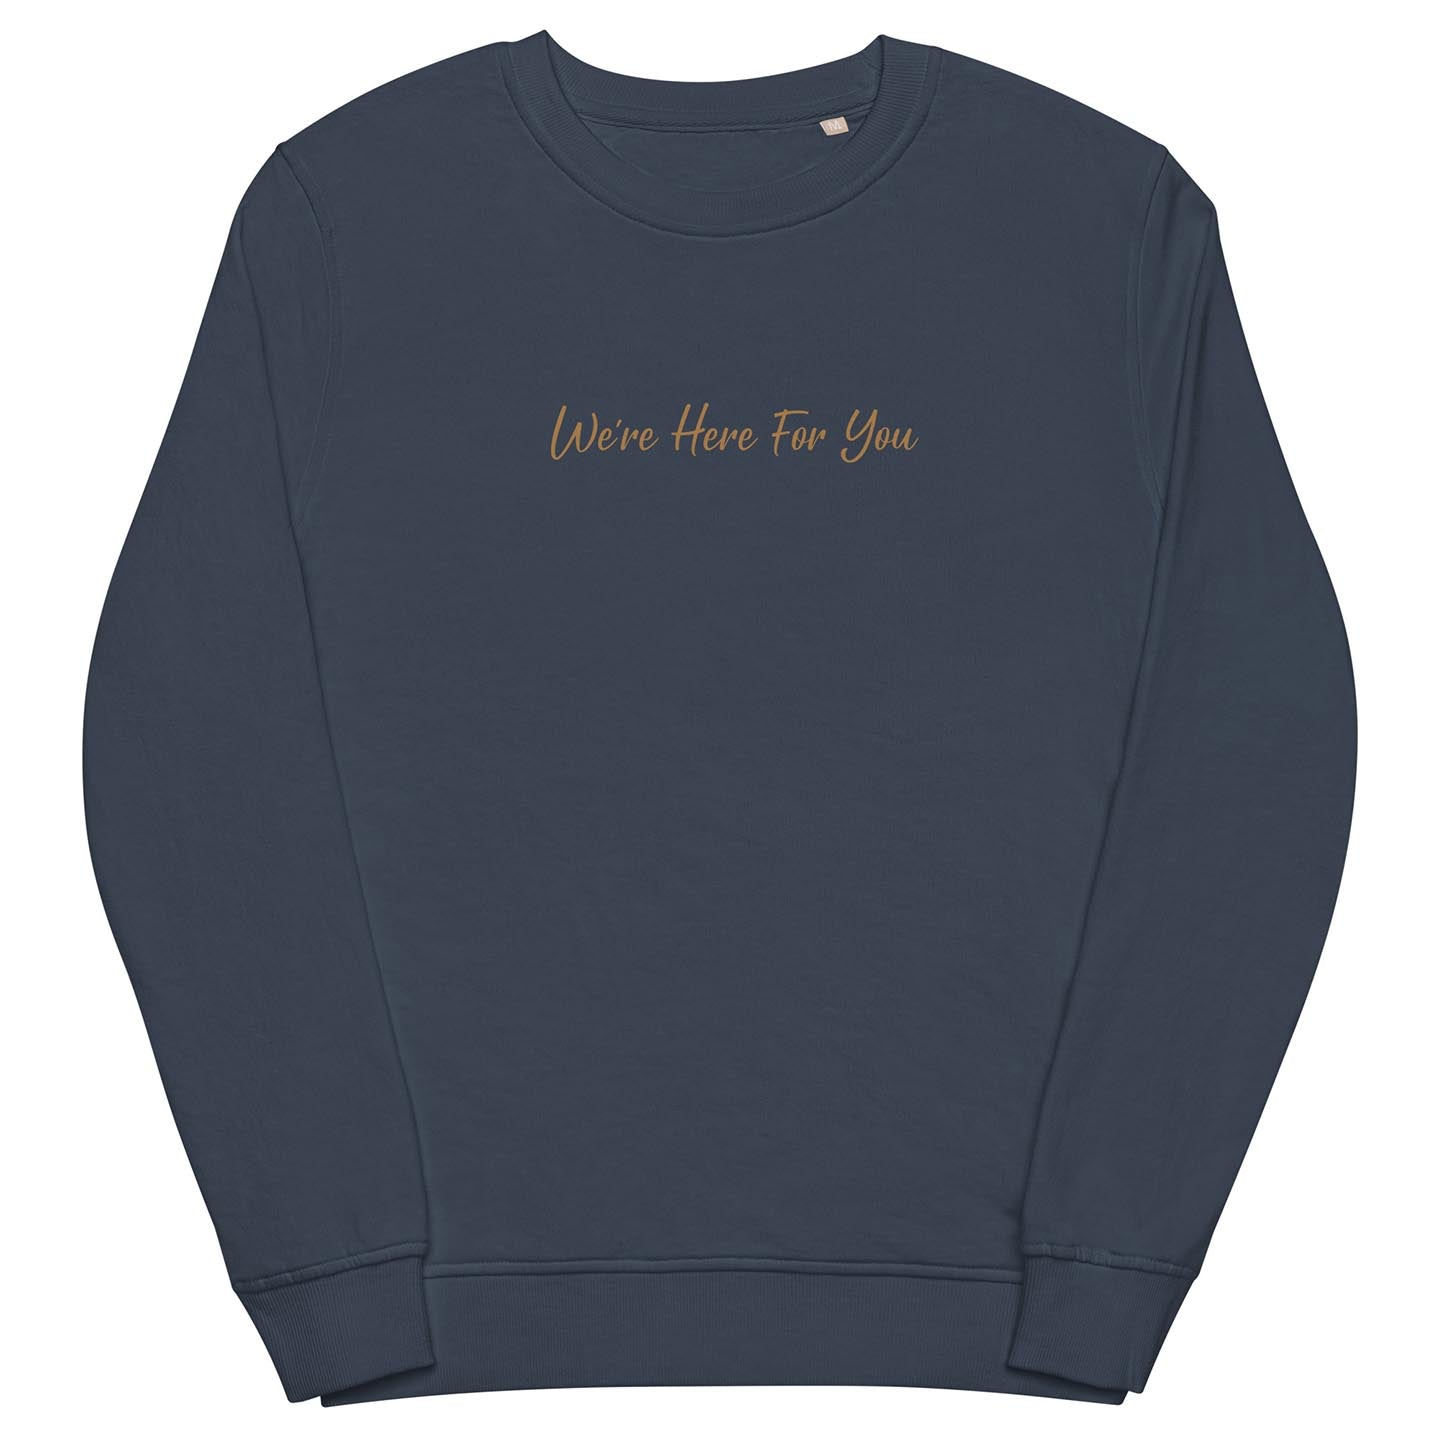 Men navy positive sweatshirt with inspirational quote, "We Are Here For You."